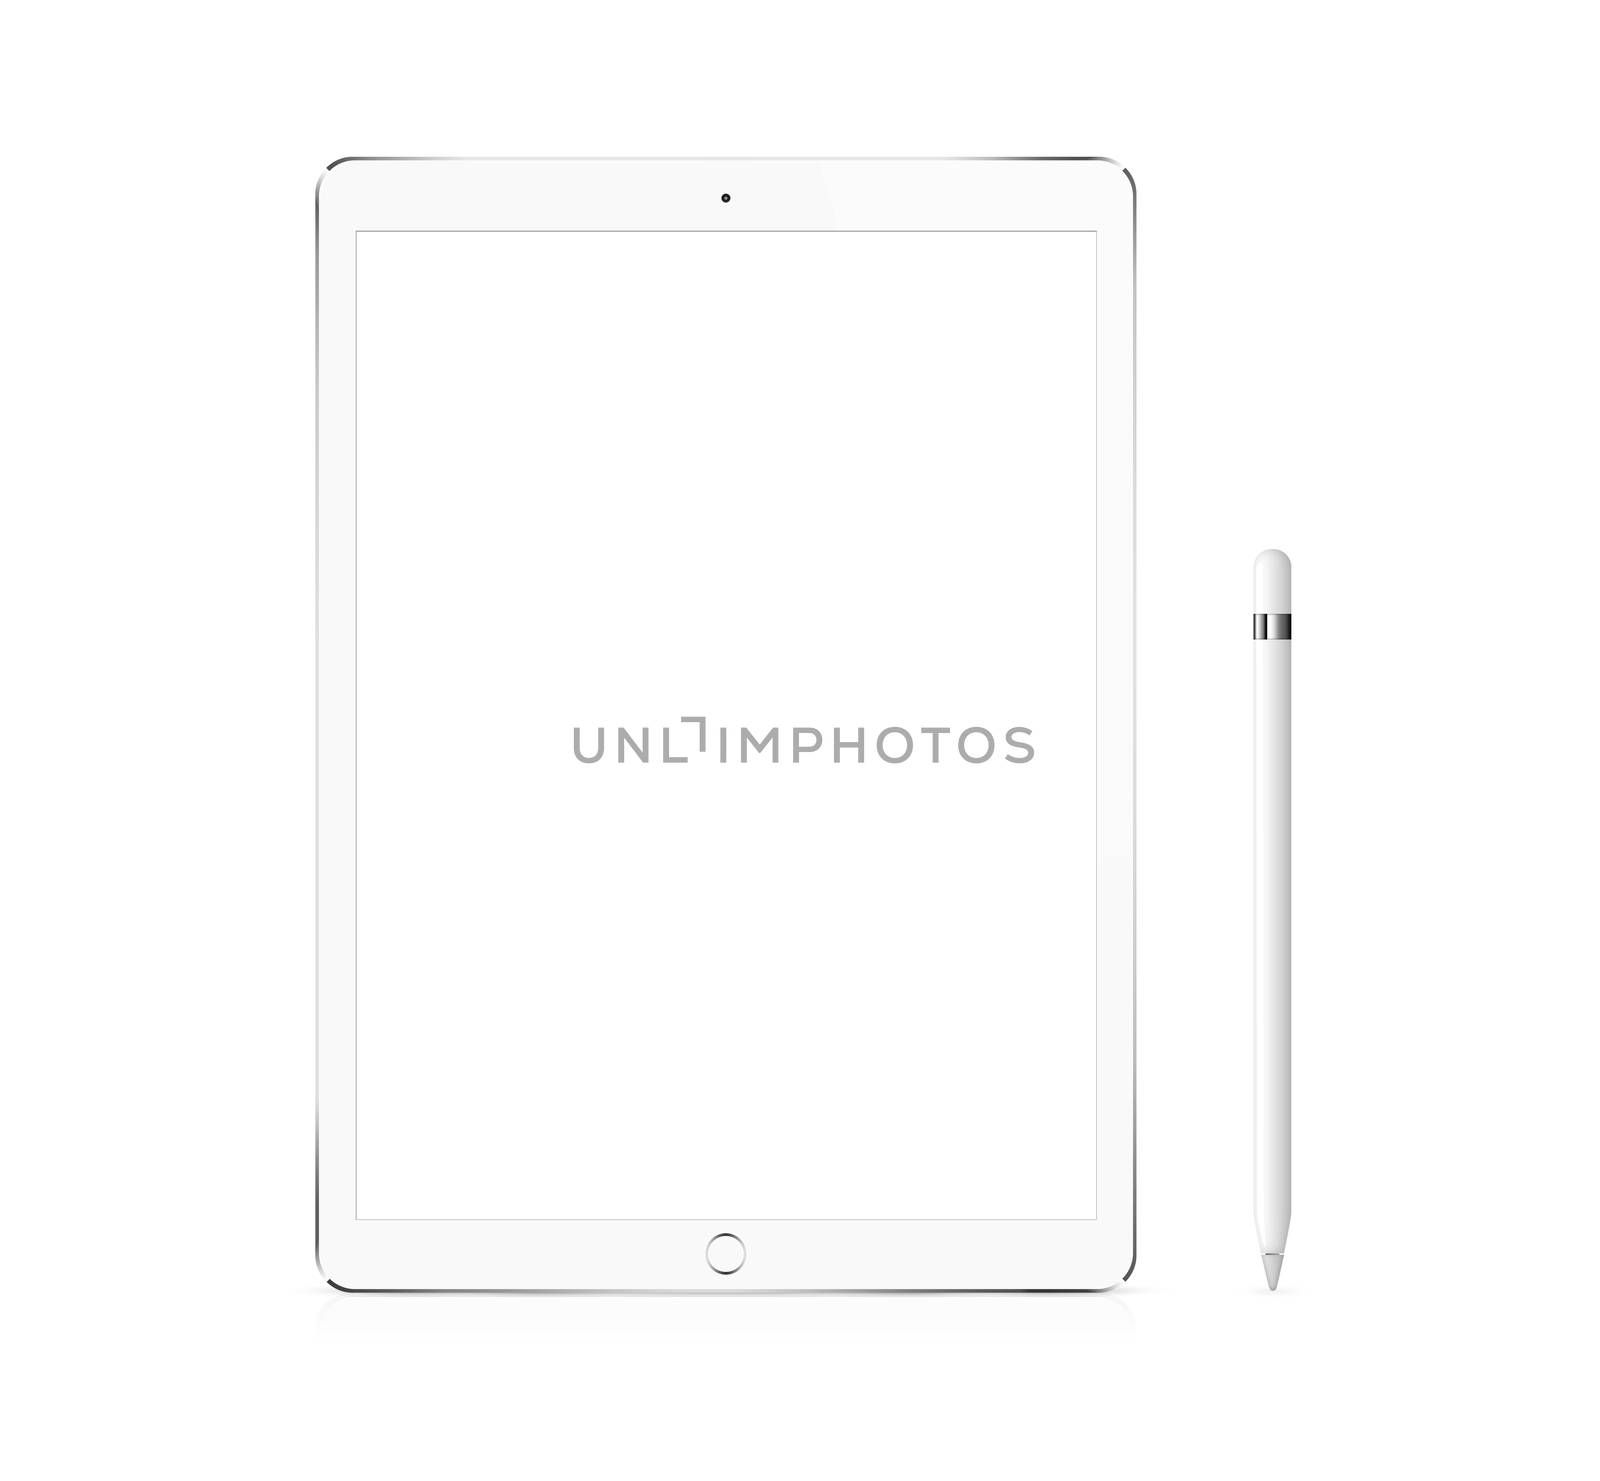 Silver Apple iPad Pro portable device with pencil by cougarsan